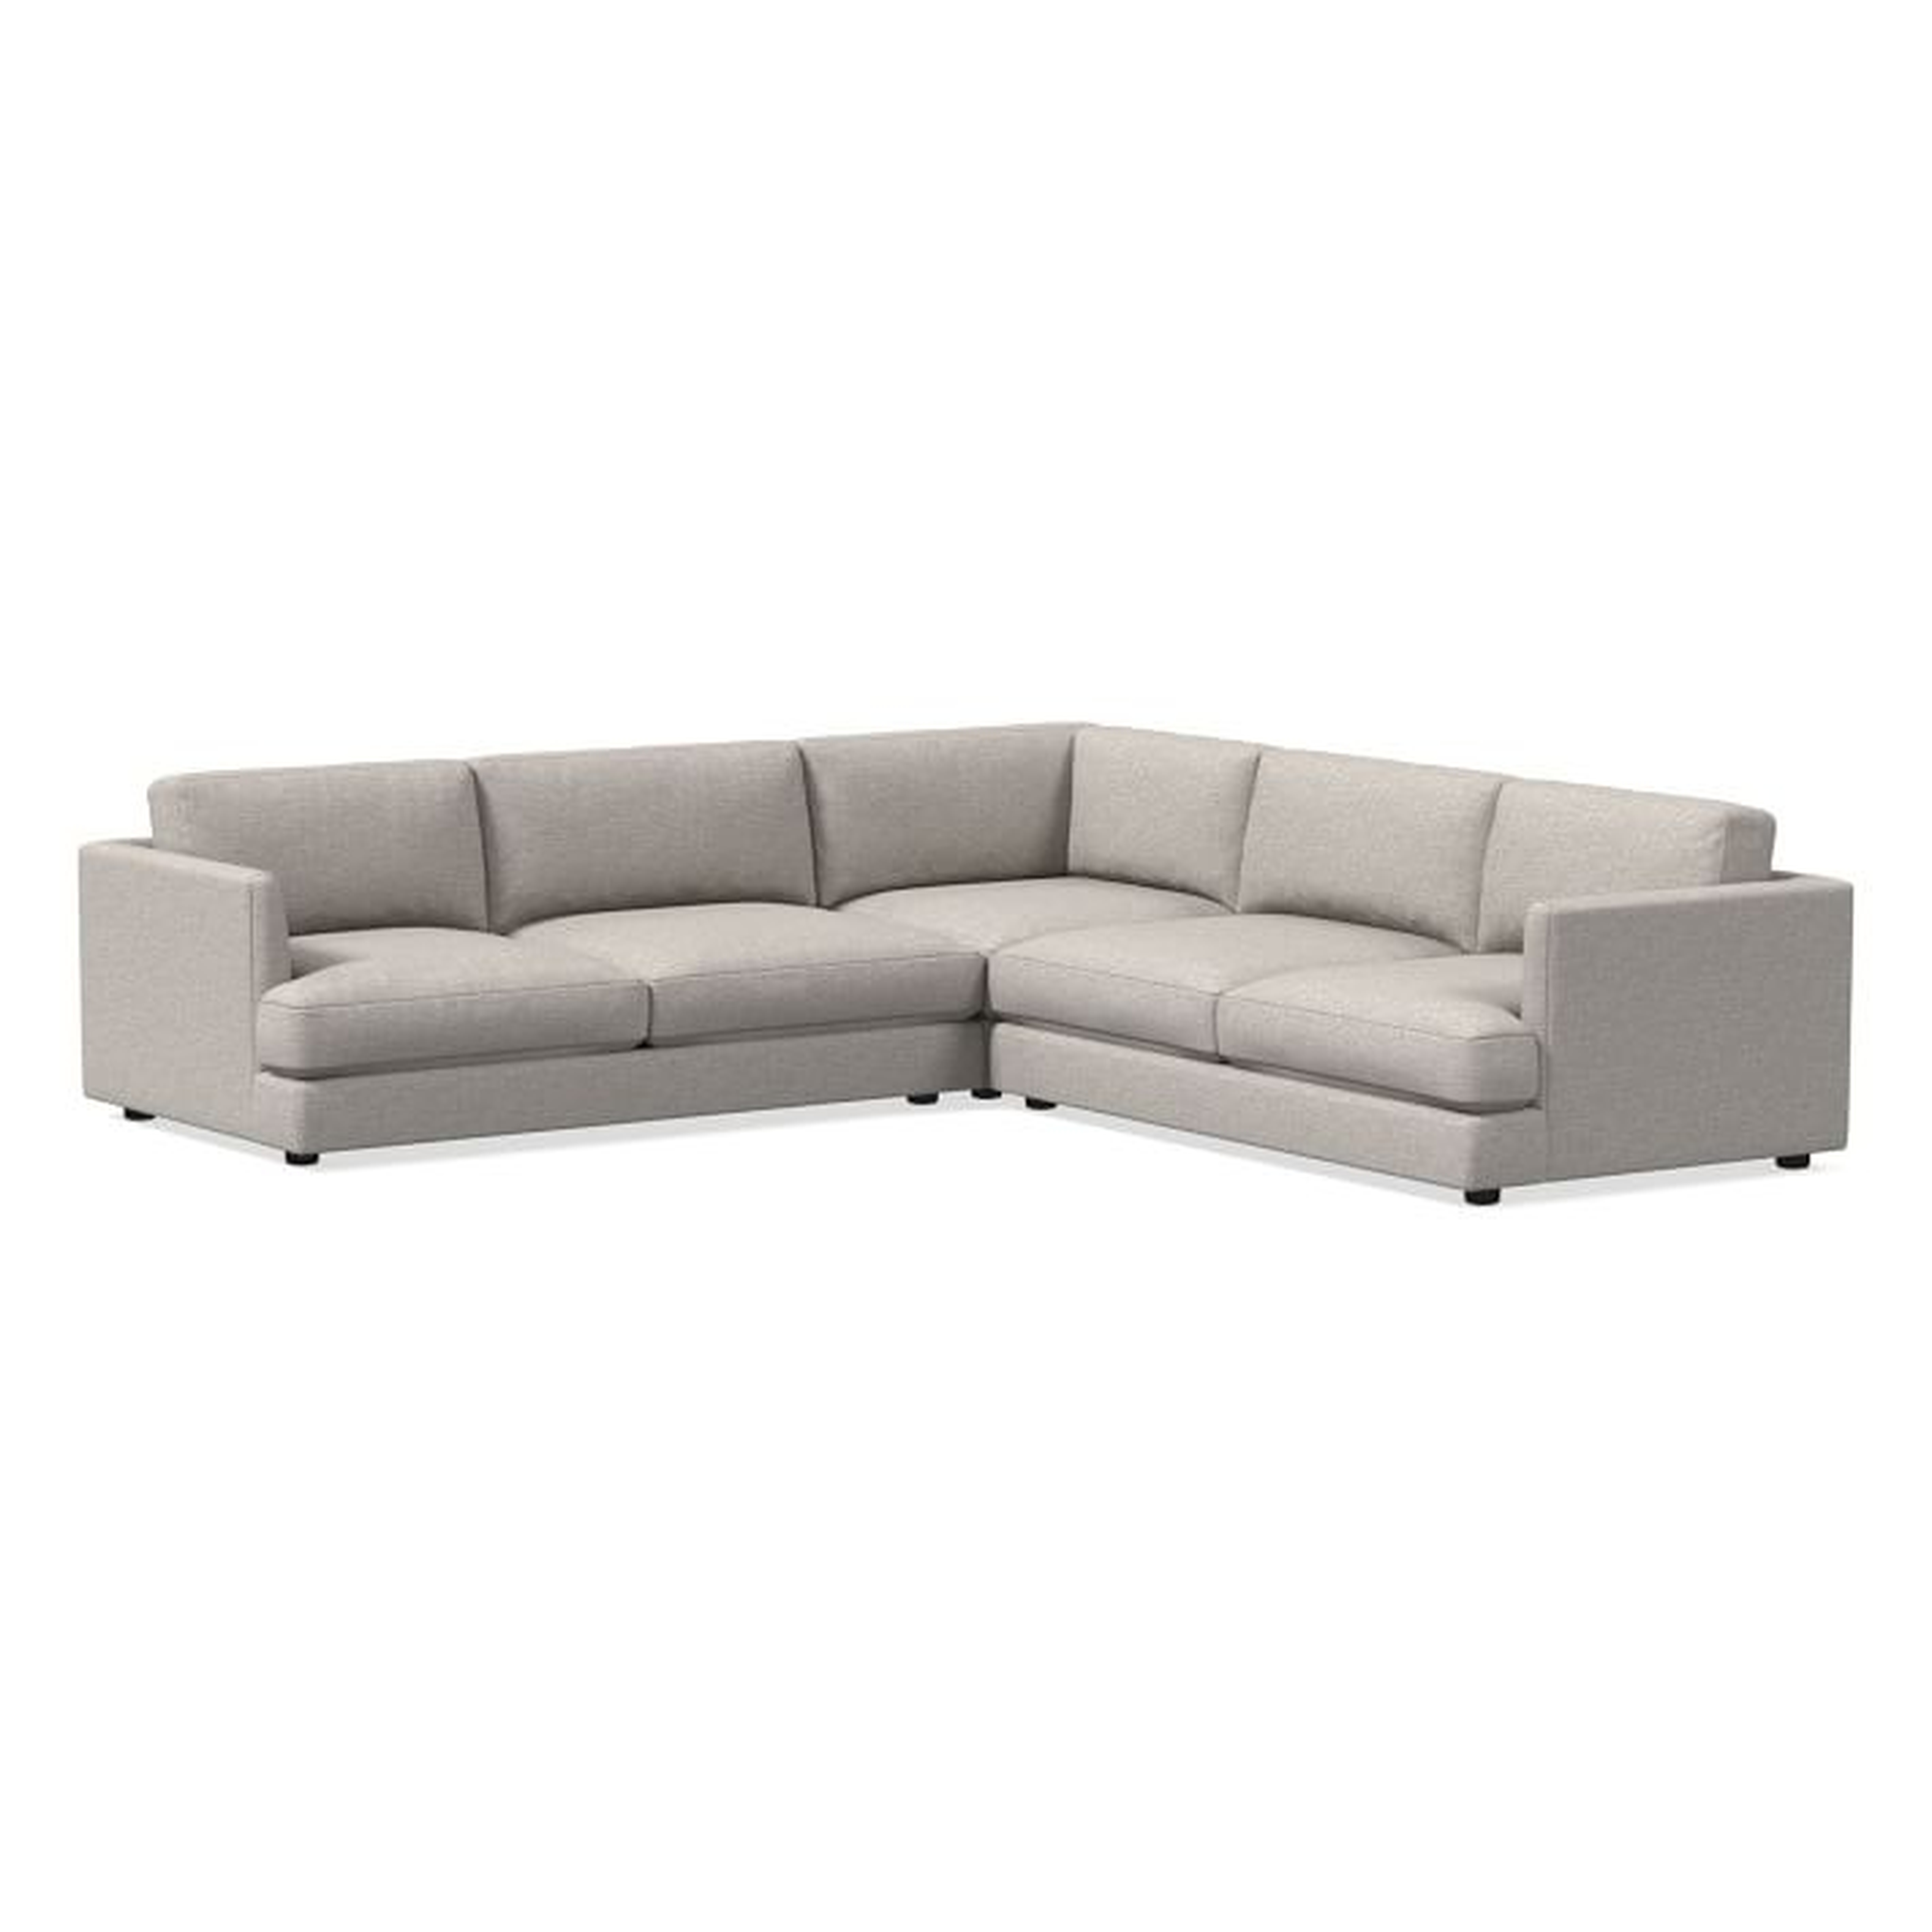 Haven Sectional Set 03: Left Arm Sofa, Corner, Right Arm Sofa, Chunky Basketweave, Stone, Concealed Support, Trillium - West Elm